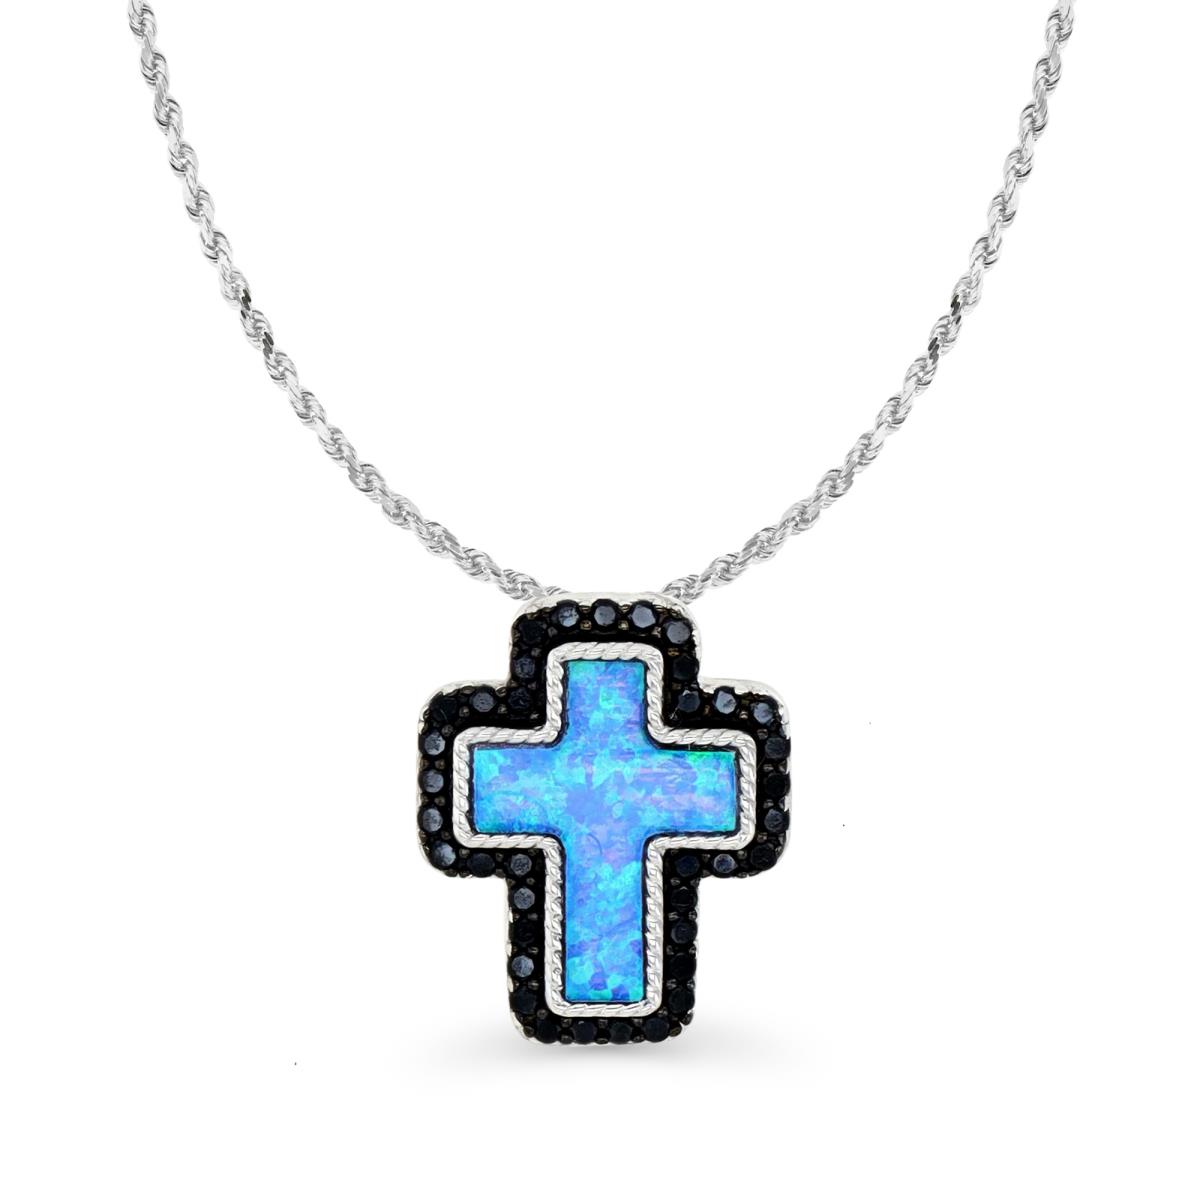  Sterling Silver Rhodium and Black & Cr. Blue Opal and Black Spinel Cross 18+2" Necklace